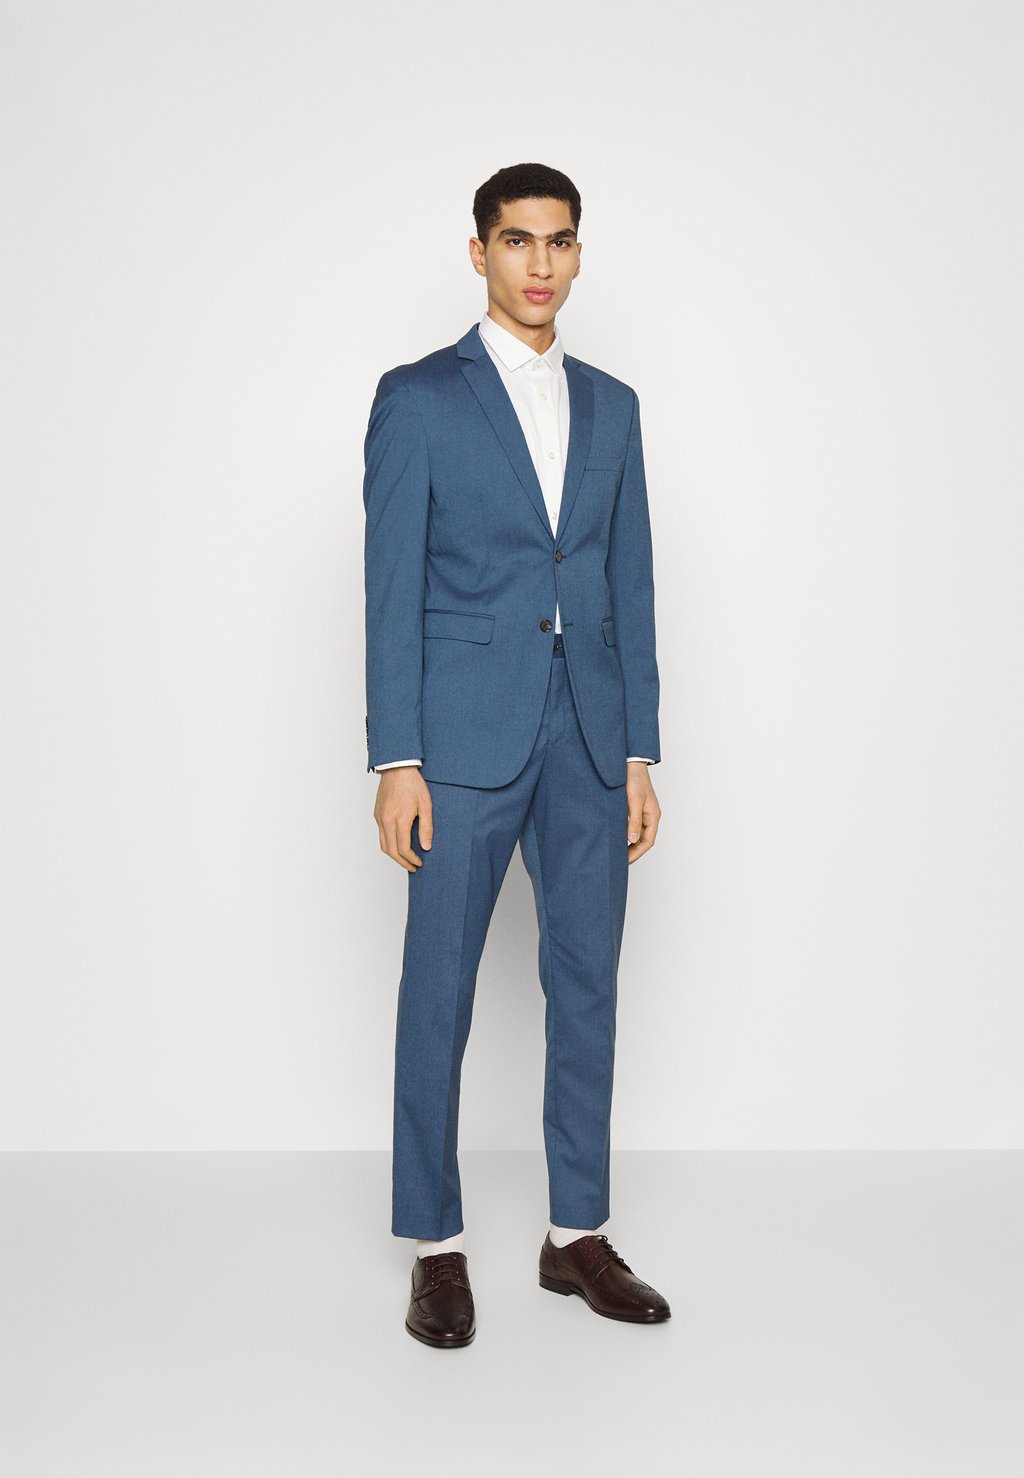 nadel barbara ashes to ashes Костюм SLHSLIM MYLOLOGAN SUIT Selected Homme, цвет blue ashes